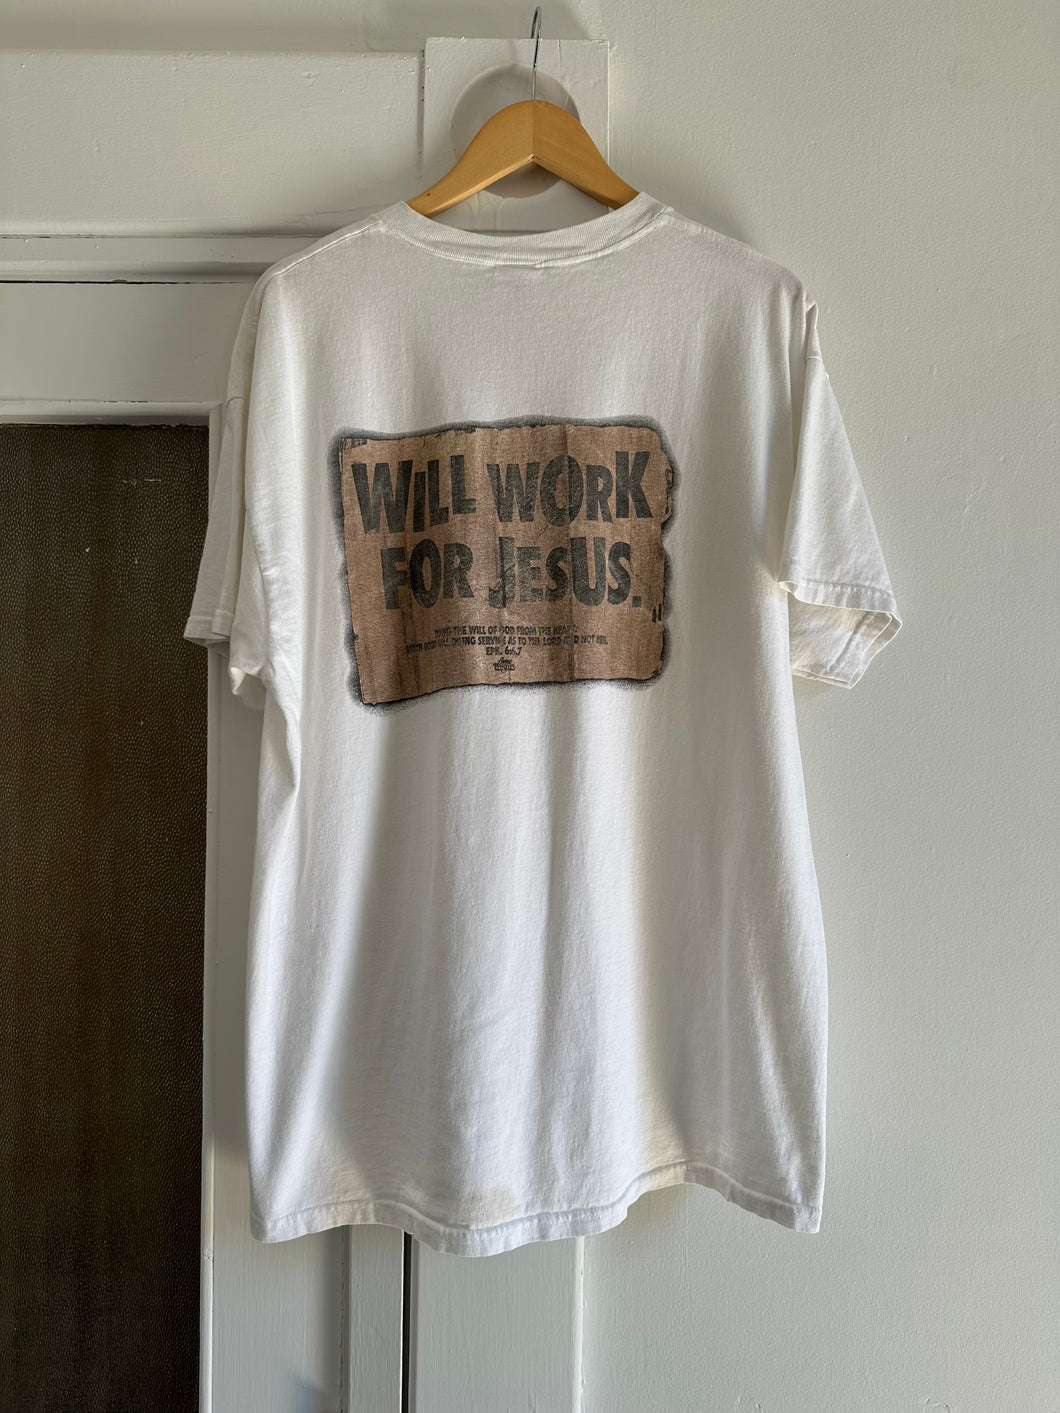 will work for jesus tee